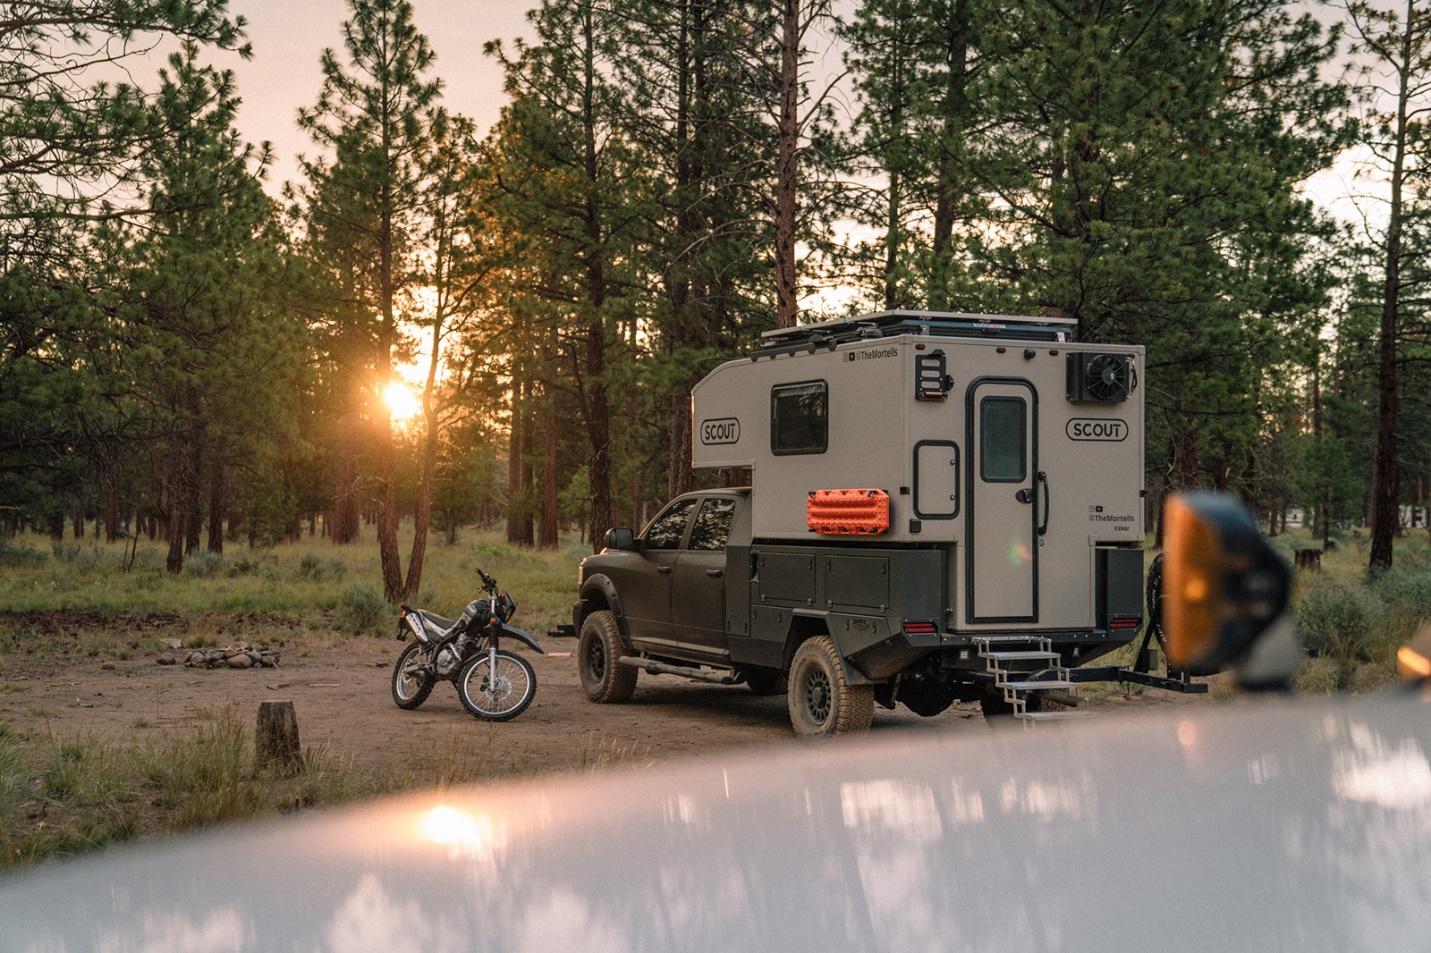 An off road park for camping with an overlander and dirt bike